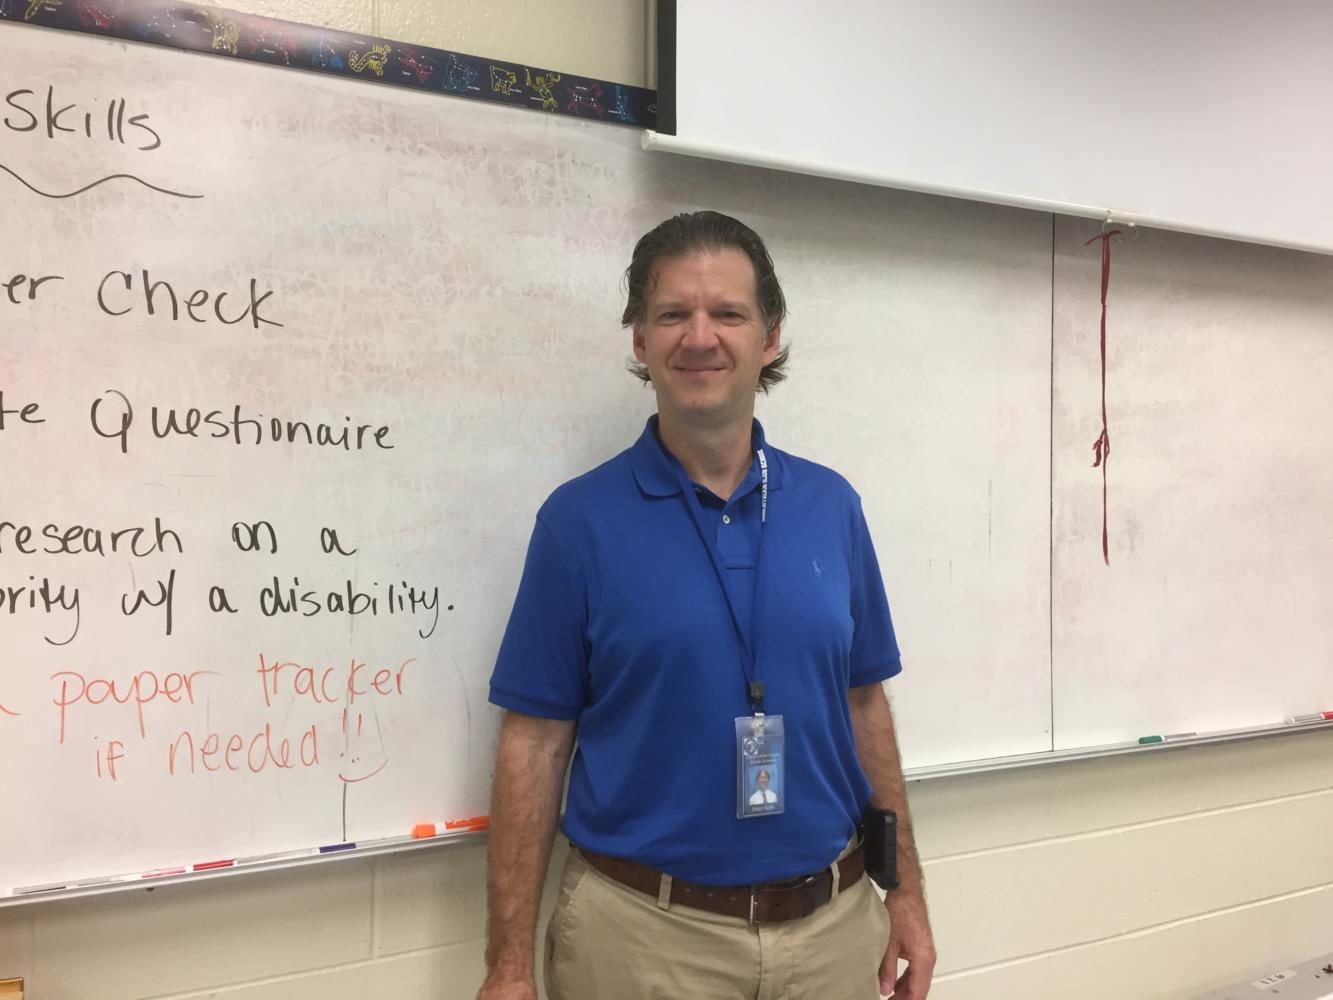 Mr. Peter Nalls, who teaches American Sign Language, begins his career at Midlo.